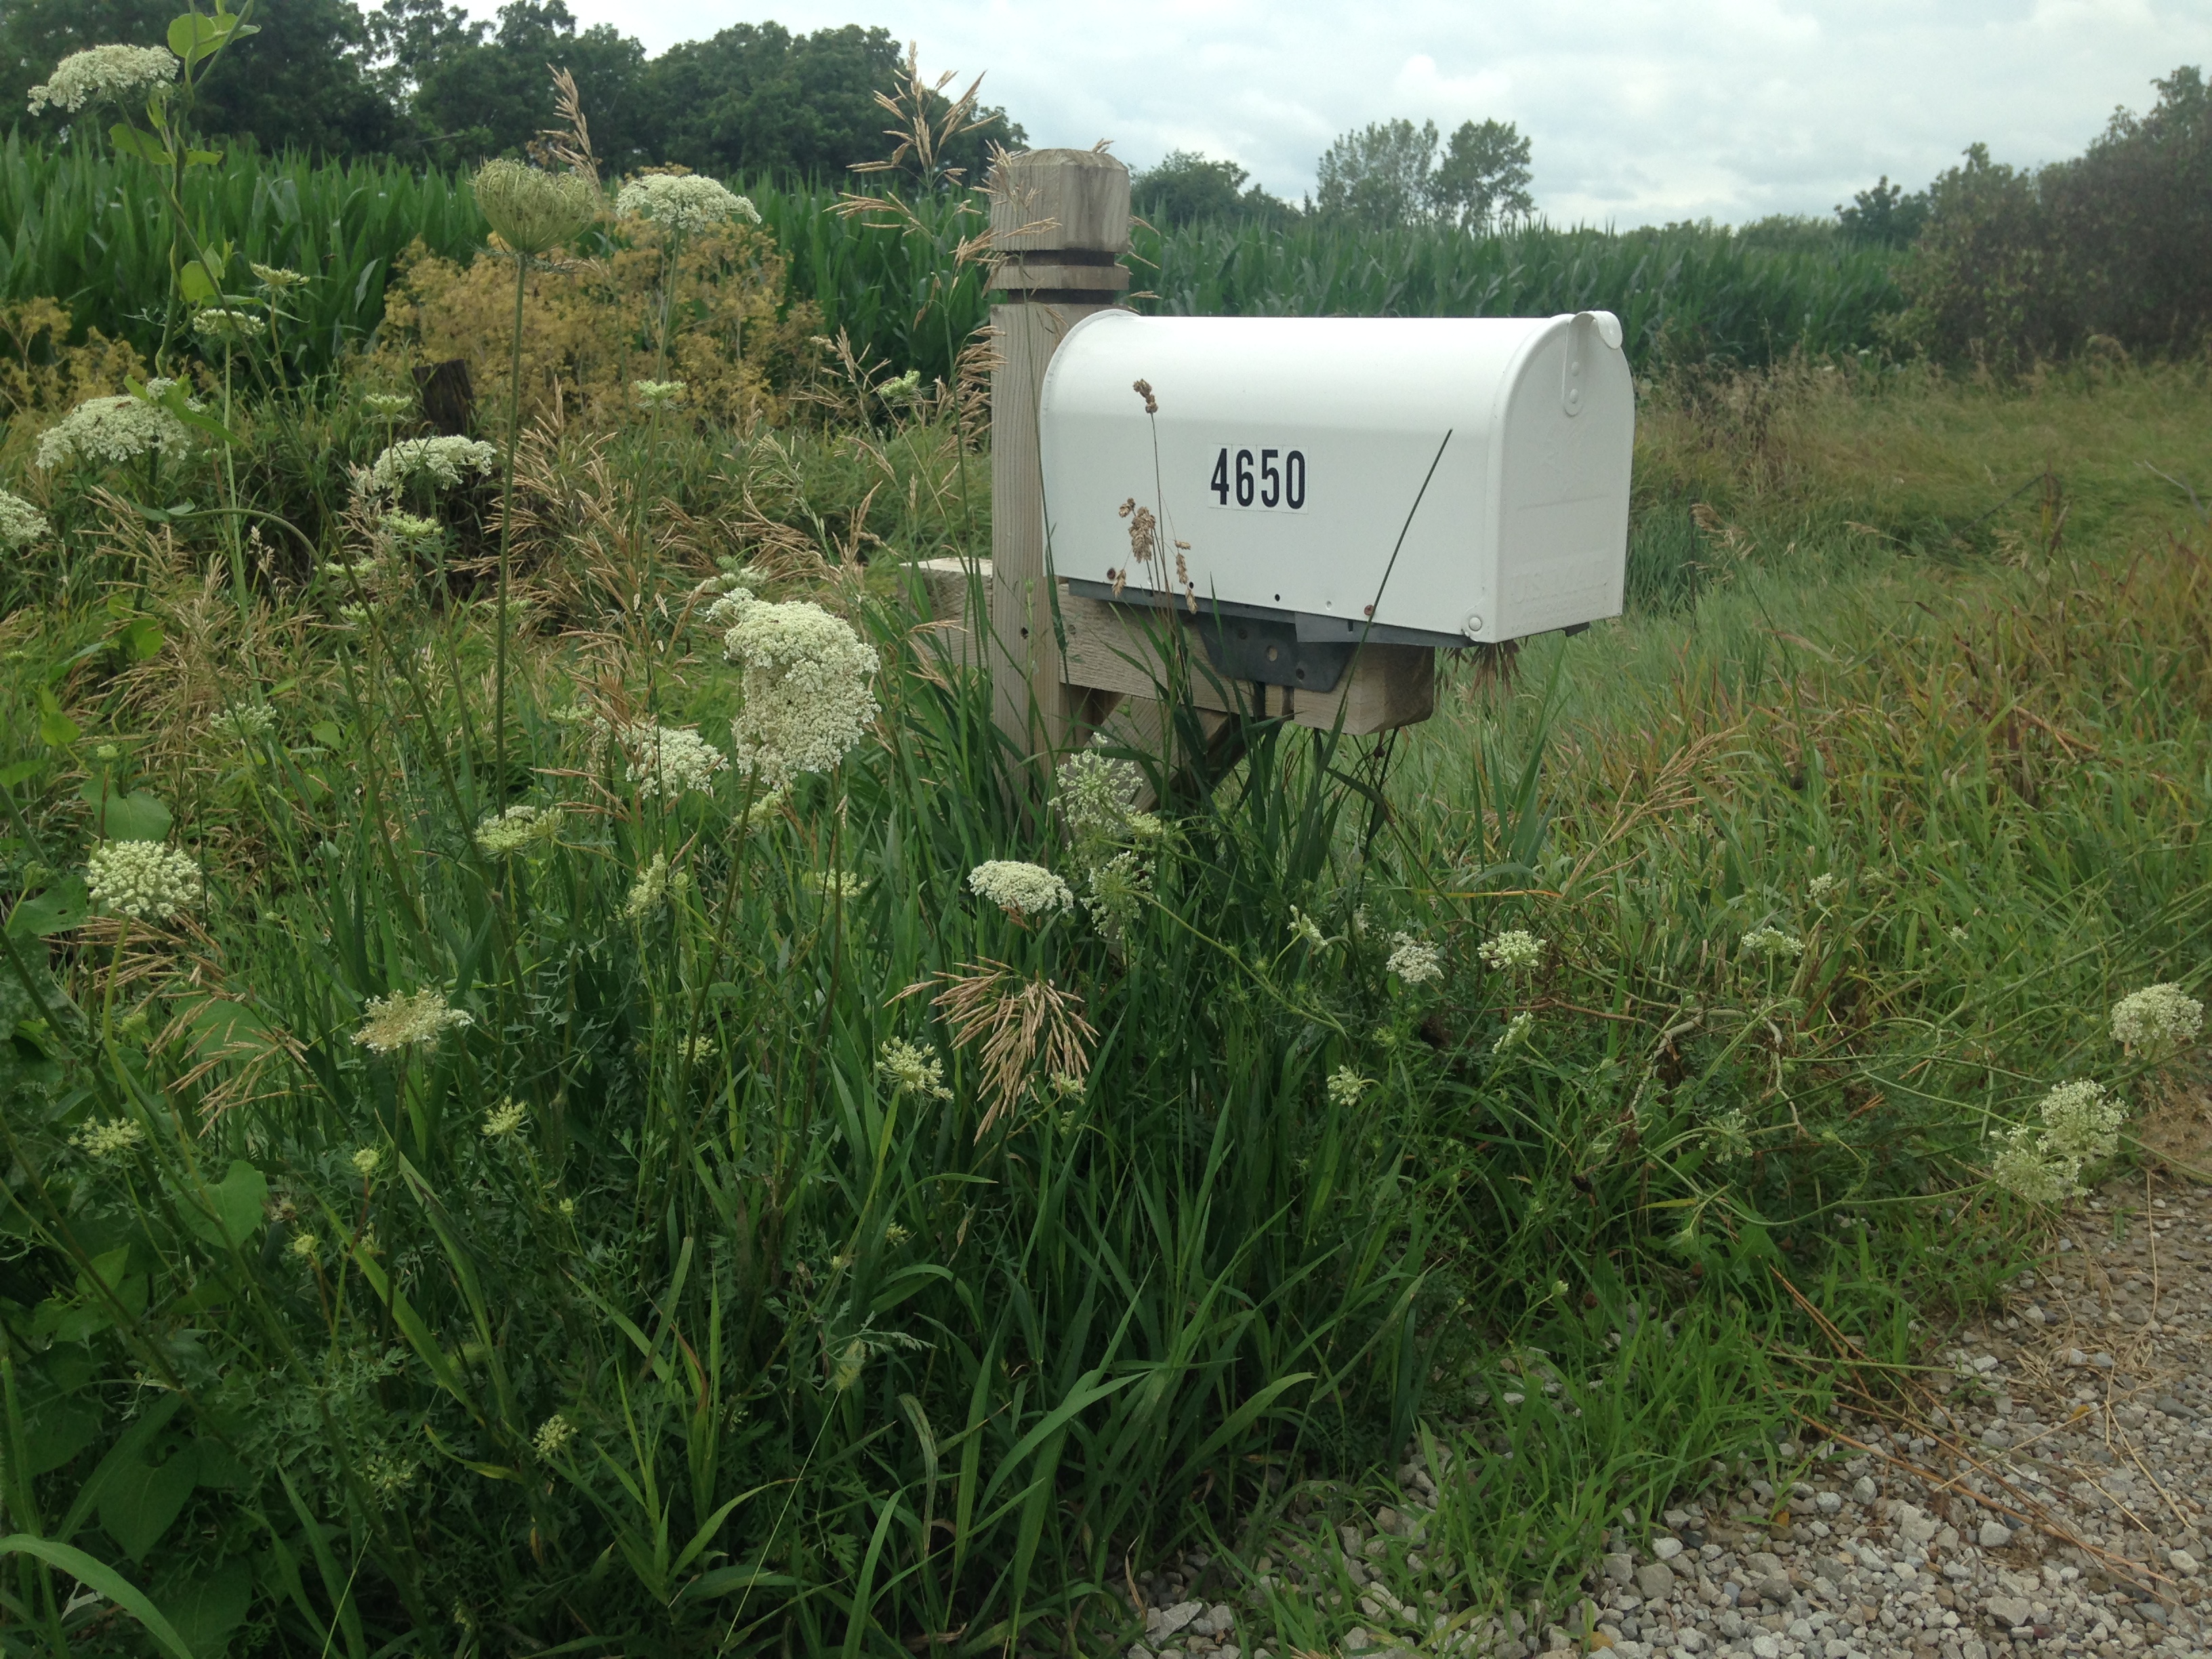 A rural mailbox surrounded by flower stalks topped with lacy umbels of tiny, white flowers. Queen Anne's Lace.